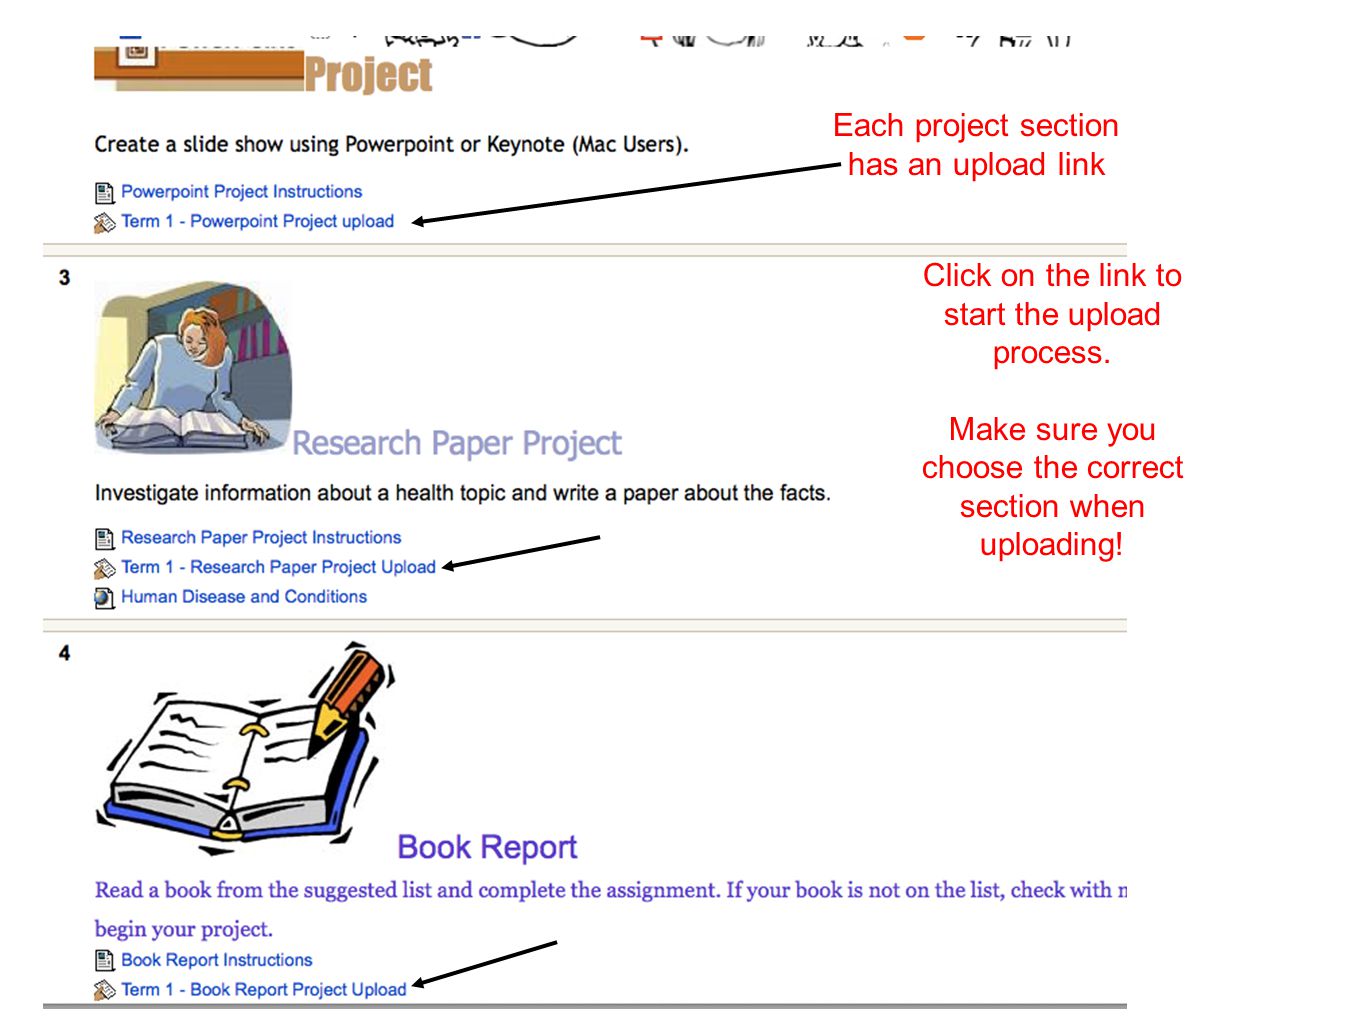 Each project section has an upload link Click on the link to start the upload process.